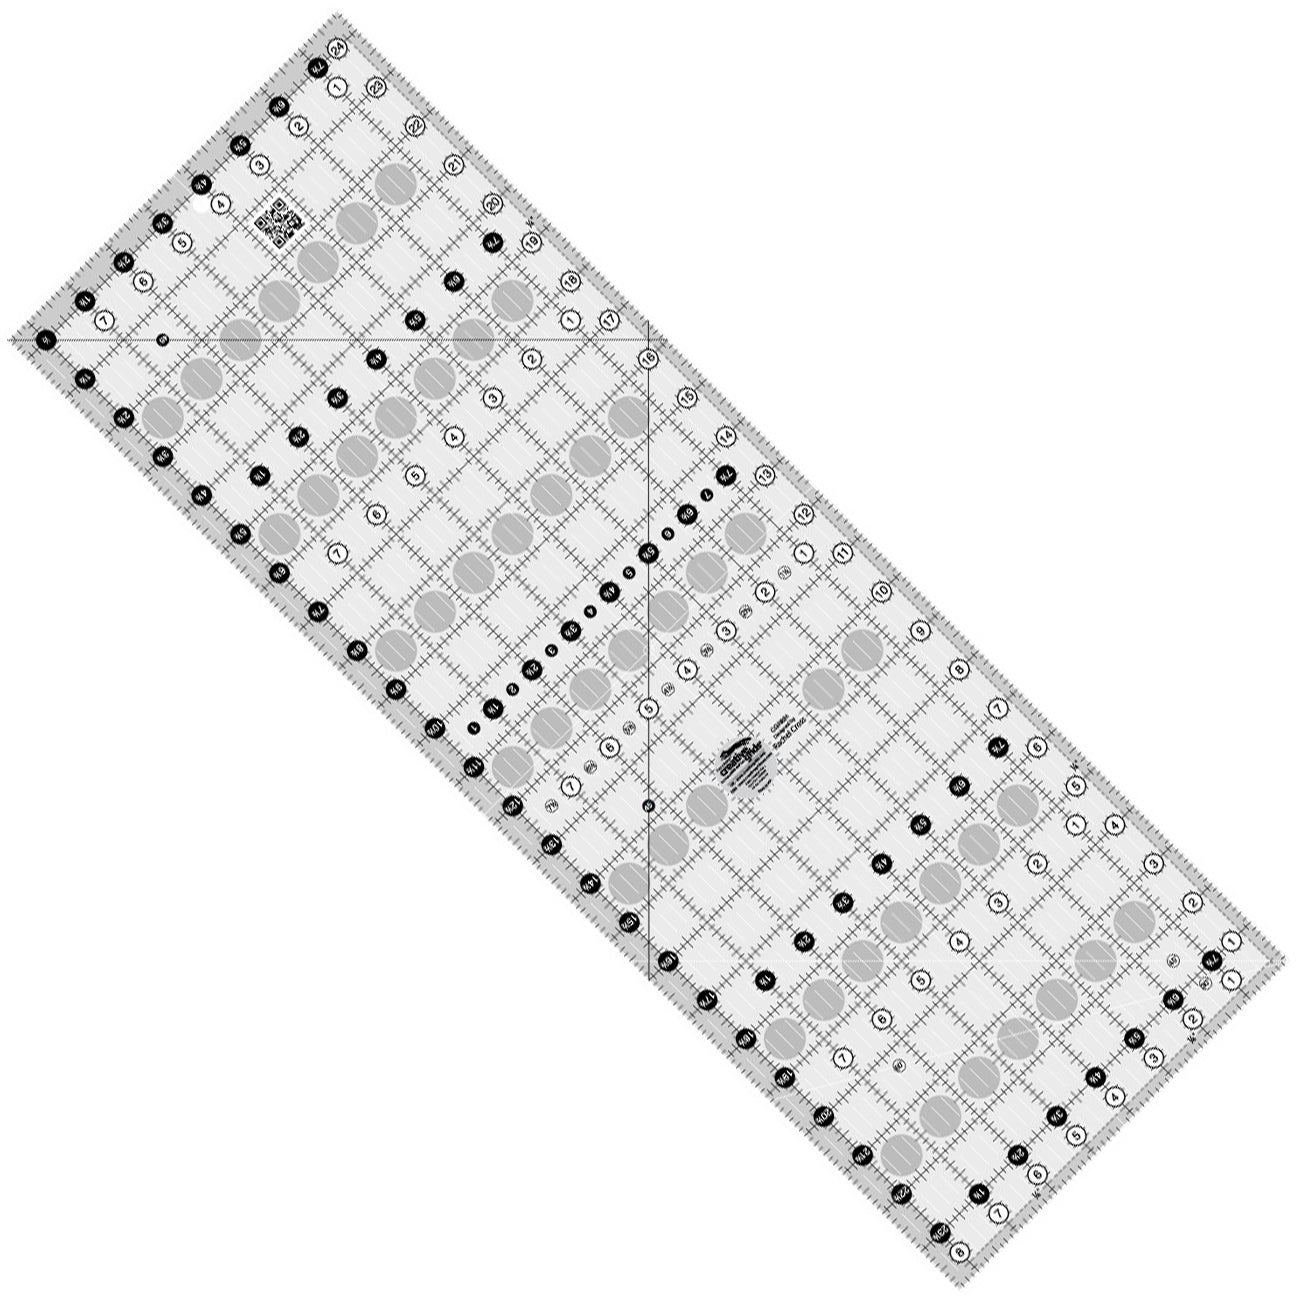 Creative Grids 8-1/2-Inch X 24-1/2-Inch Quilt Ruler (CGR824)